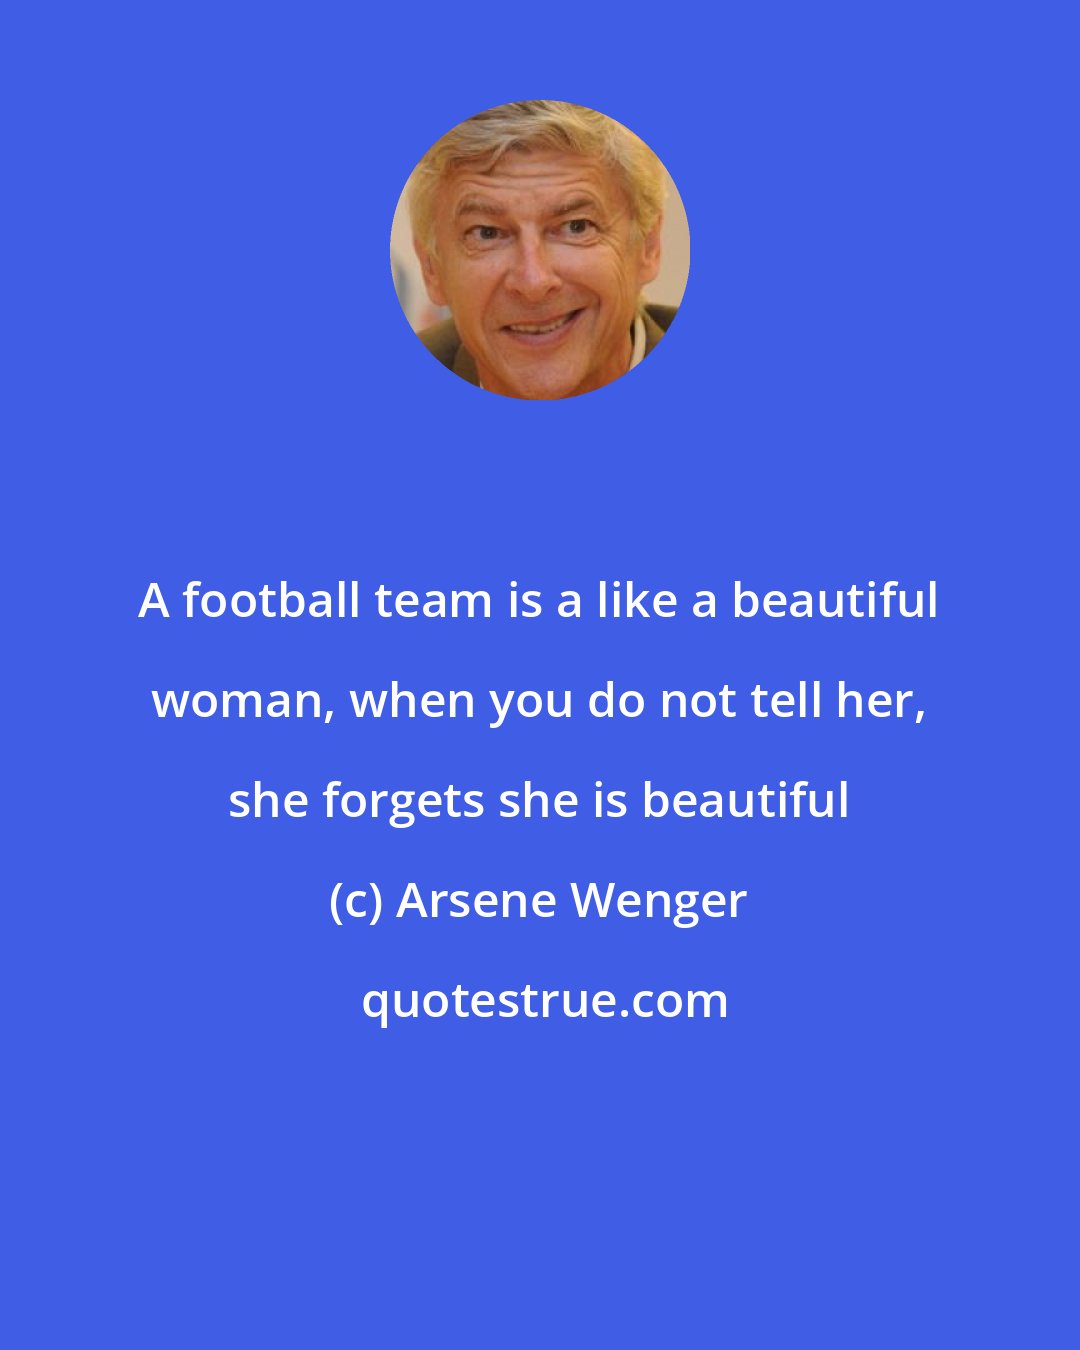 Arsene Wenger: A football team is a like a beautiful woman, when you do not tell her, she forgets she is beautiful